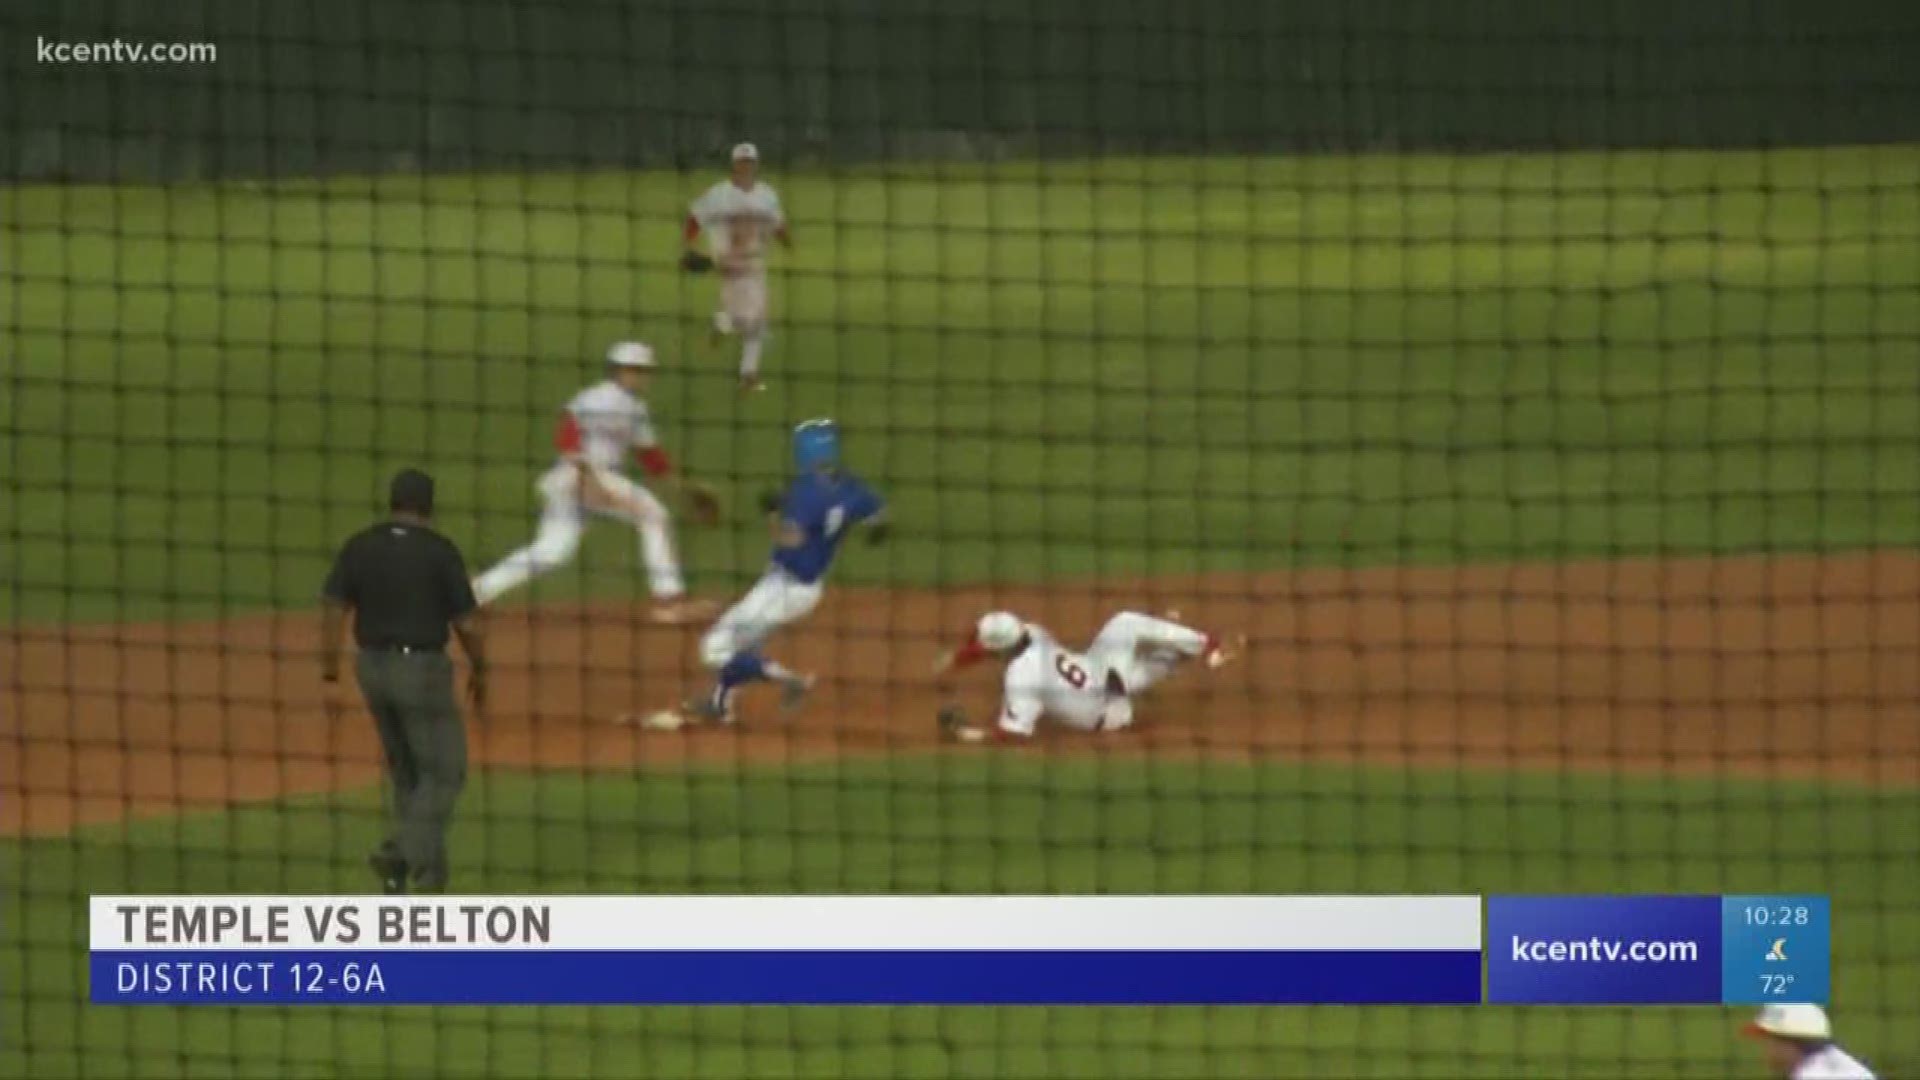 The Belton Tigers improved to 8-0 in district play with a 2-1 win over Temple.